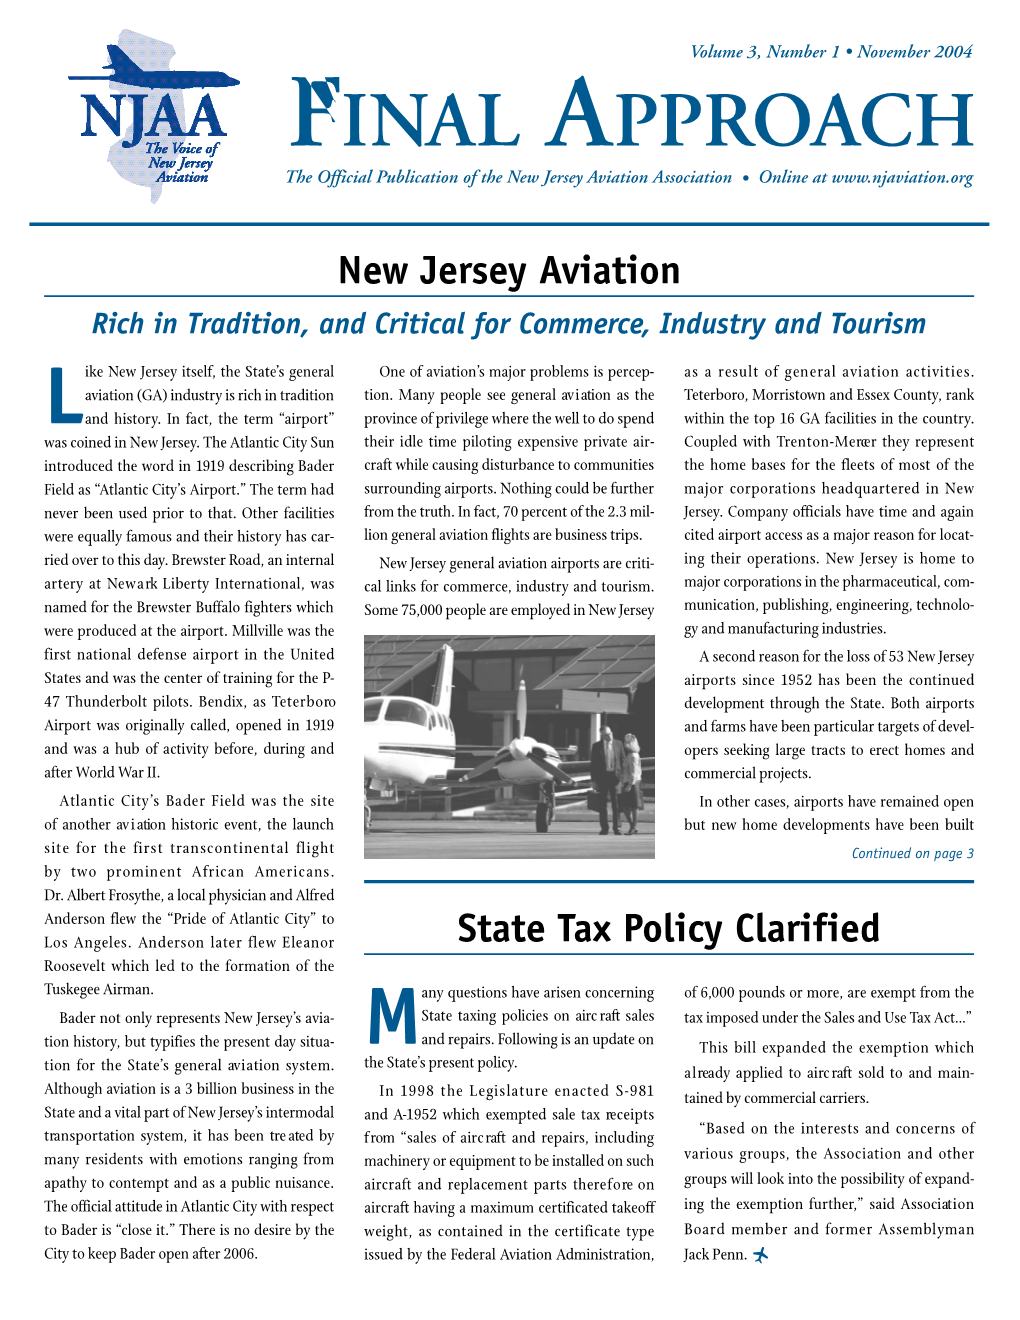 FINA L APPROAC H the Official Publication of the New Jersey Aviation Association • Online At